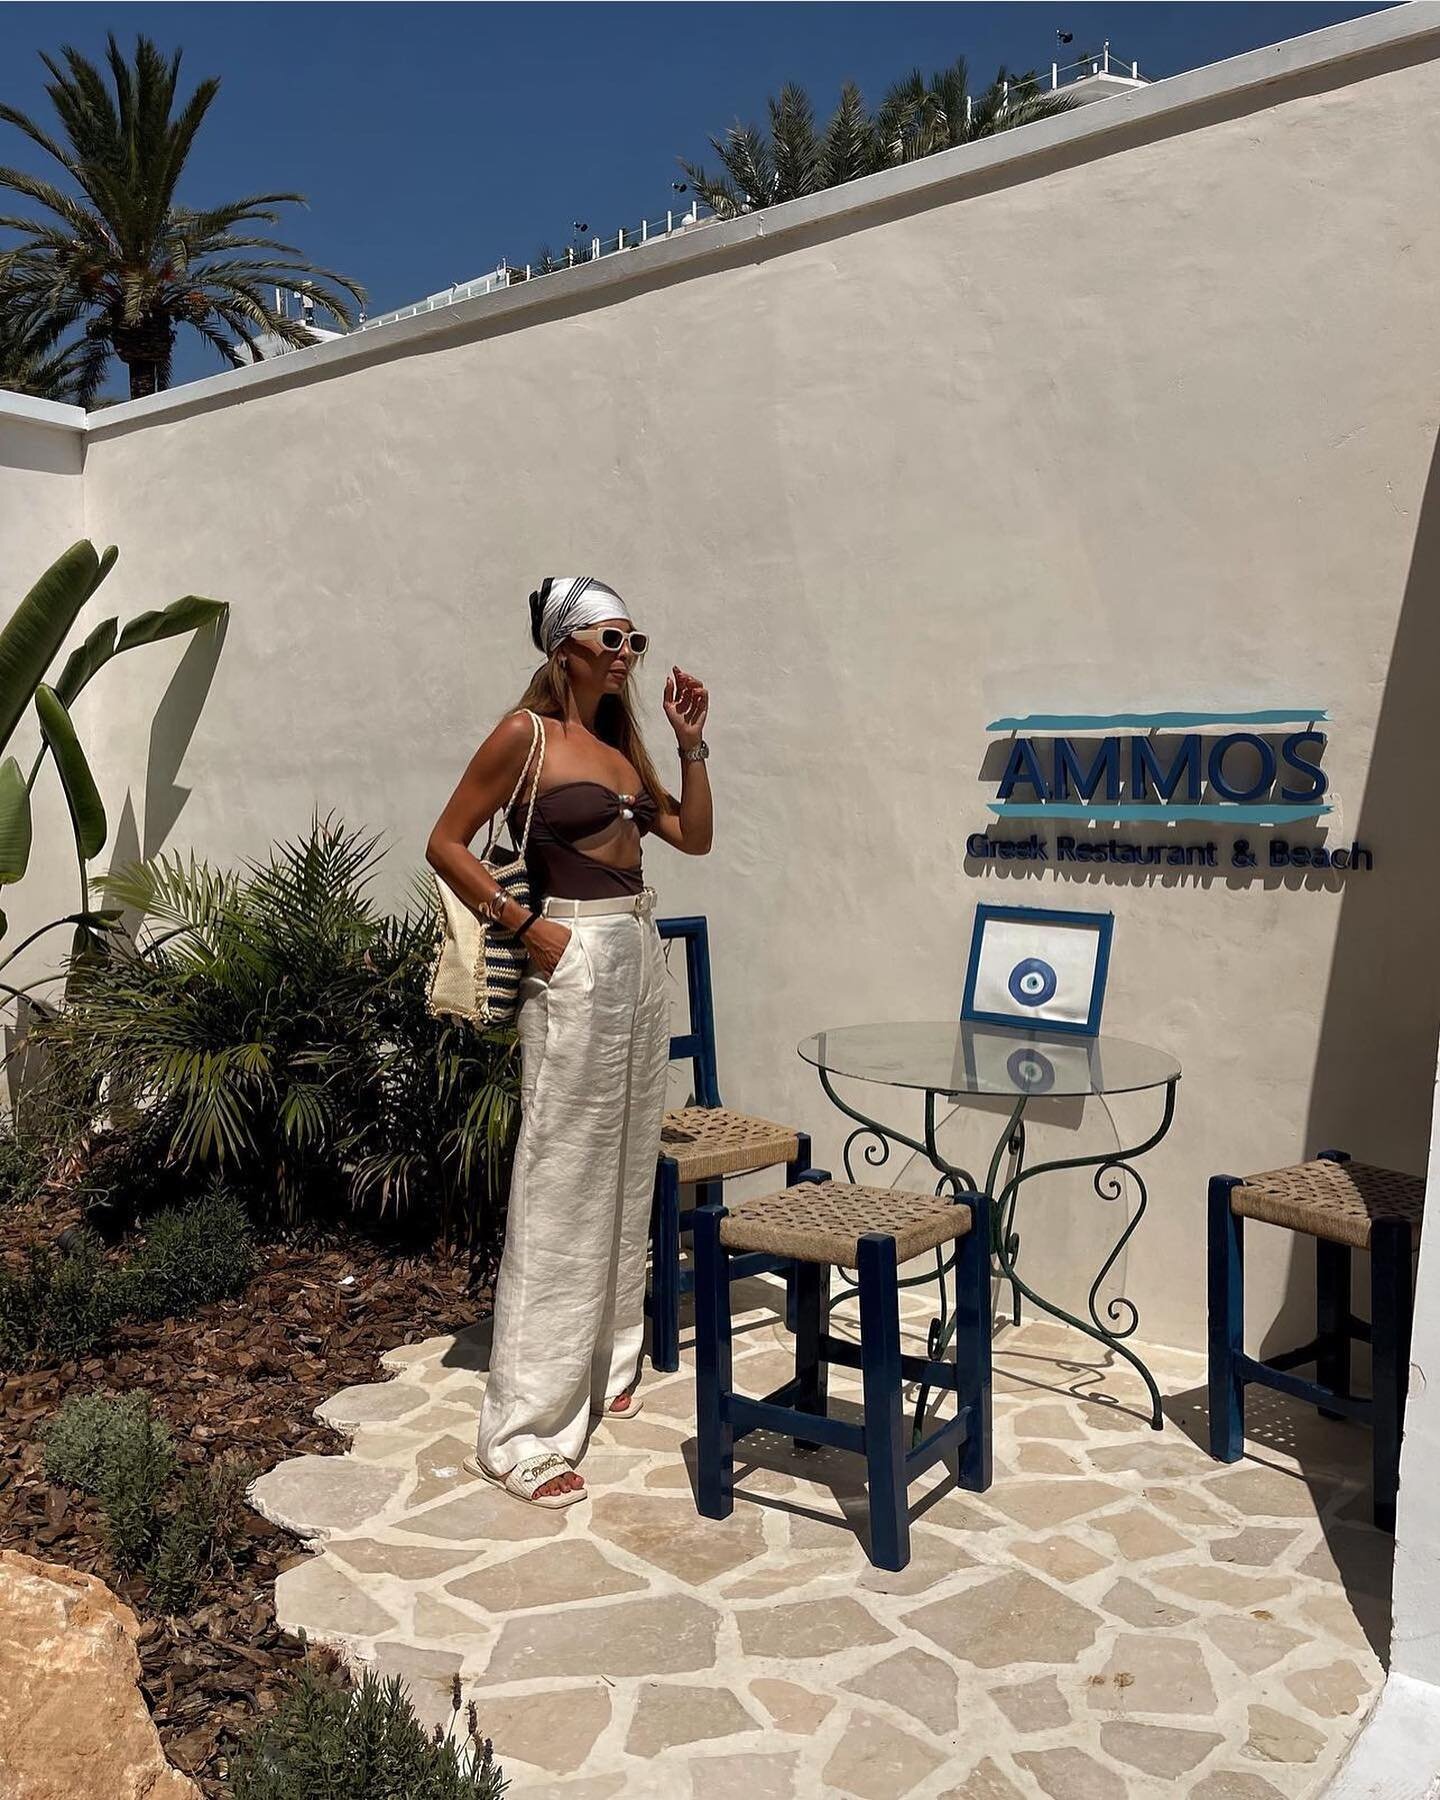 At Ammos Greek Restaurant, every corner is a picture-perfect moment 

For reservations:+ 34 621 12 10 34 | reservations.ibiza@ammosgreek.com 

#AmmosGreekRestaurant #ibiza #playadenbossa #ibizarestaurants #ibizaguide